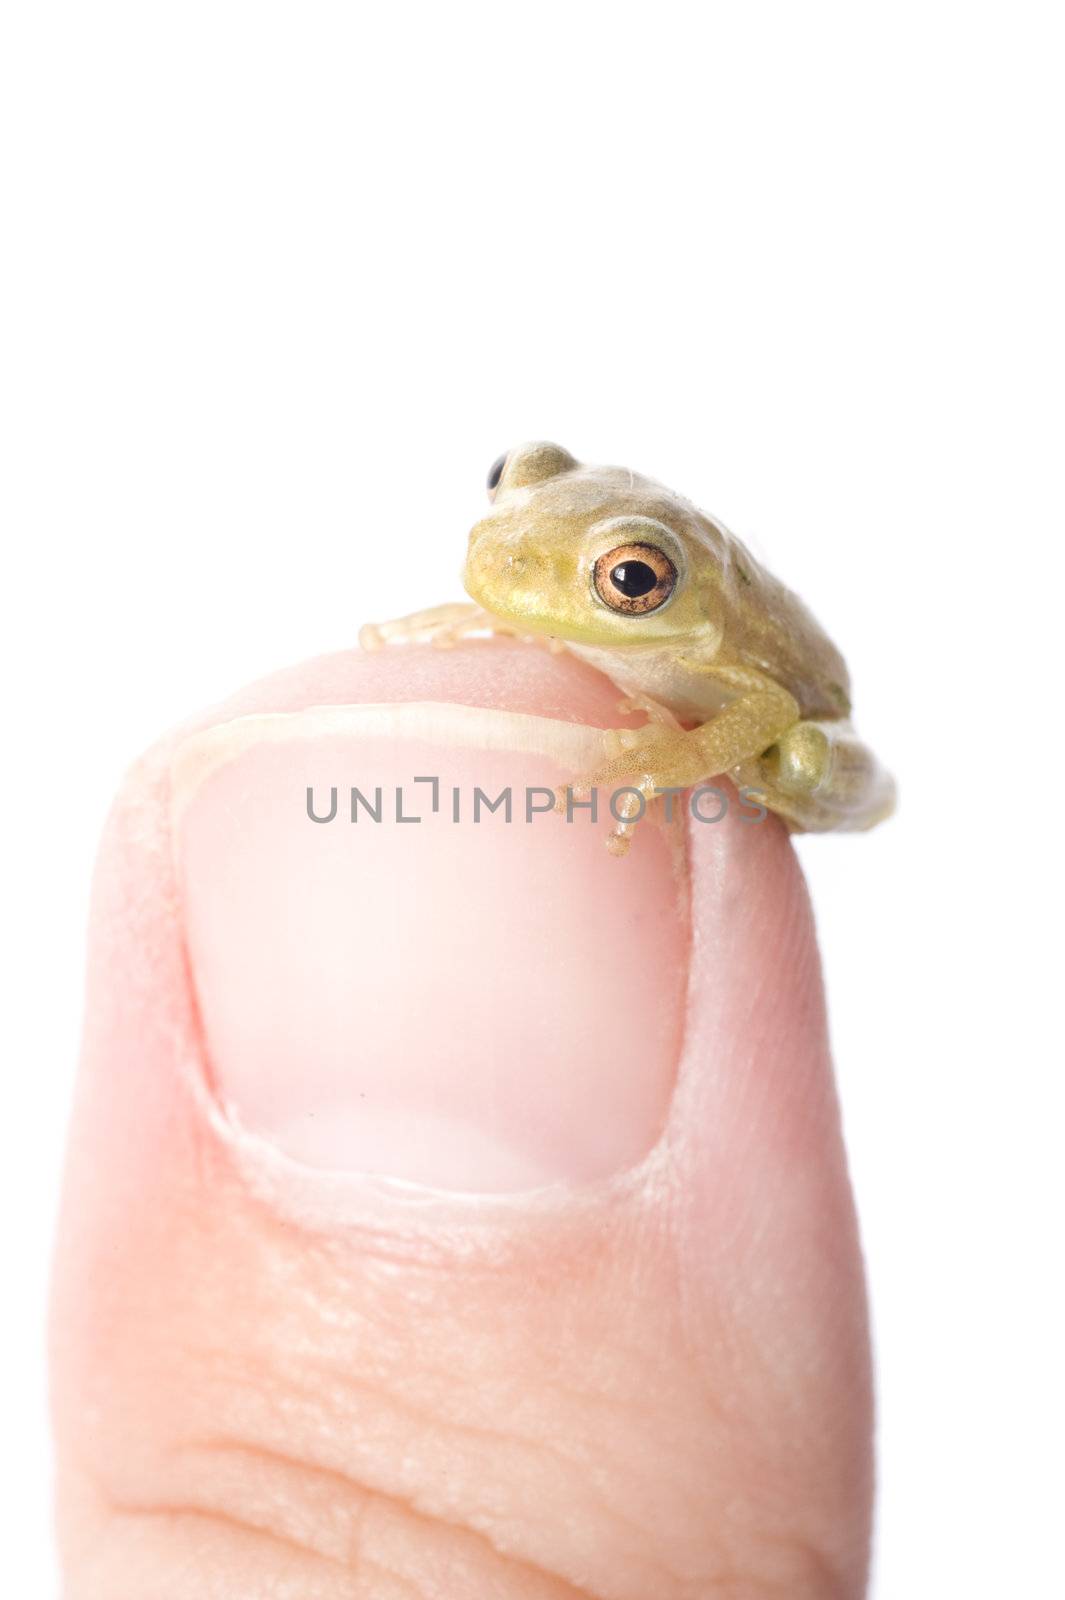 A baby tree frog sits on the tip of a thumb.